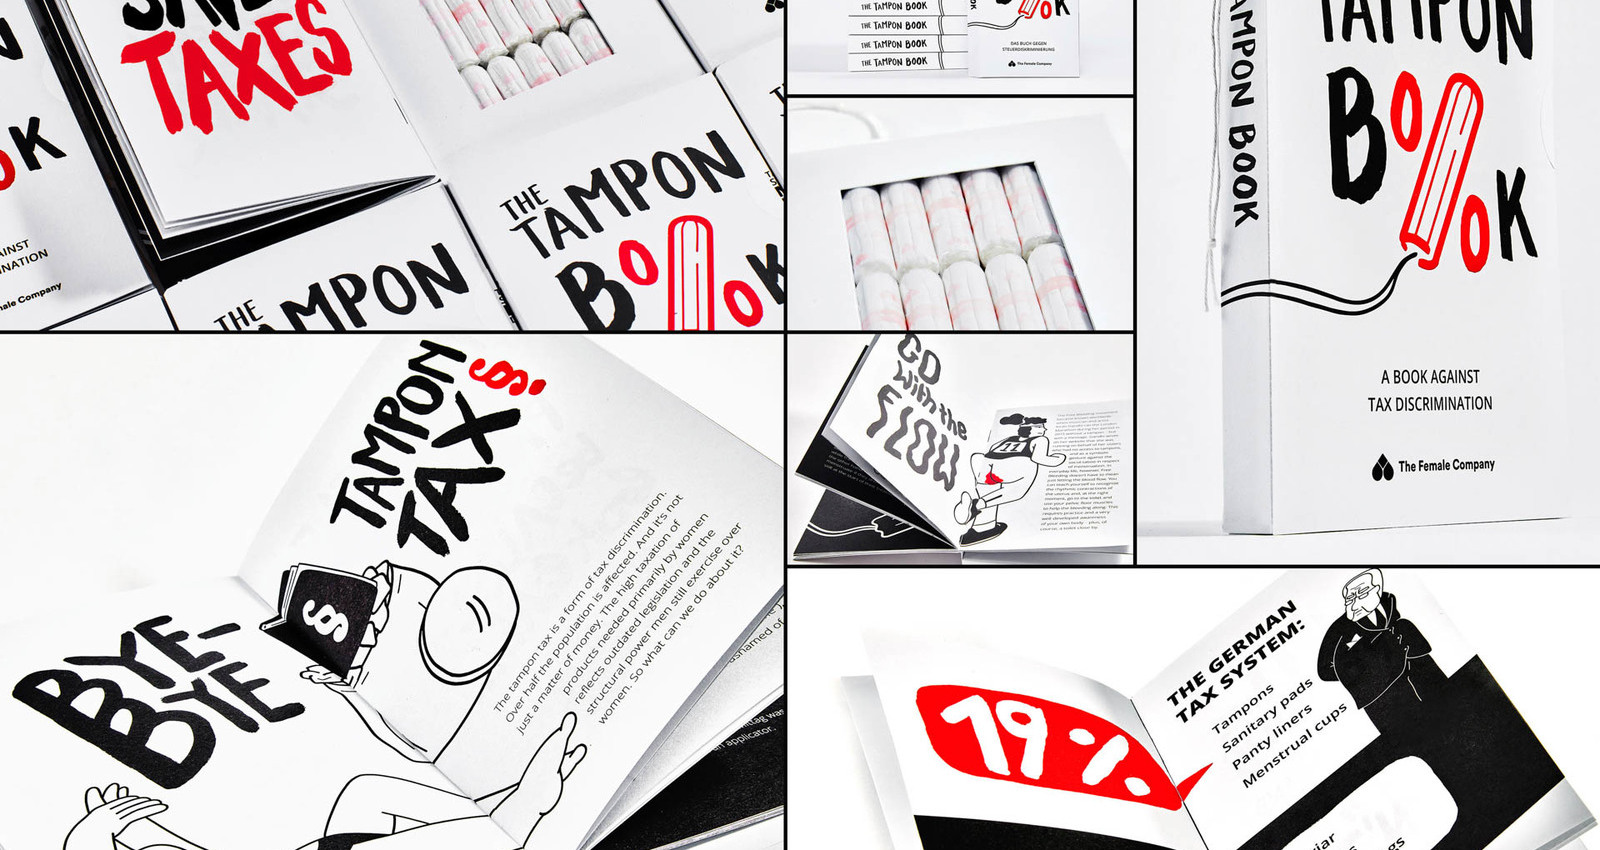 The Tampon Book: a book against tax discrimination